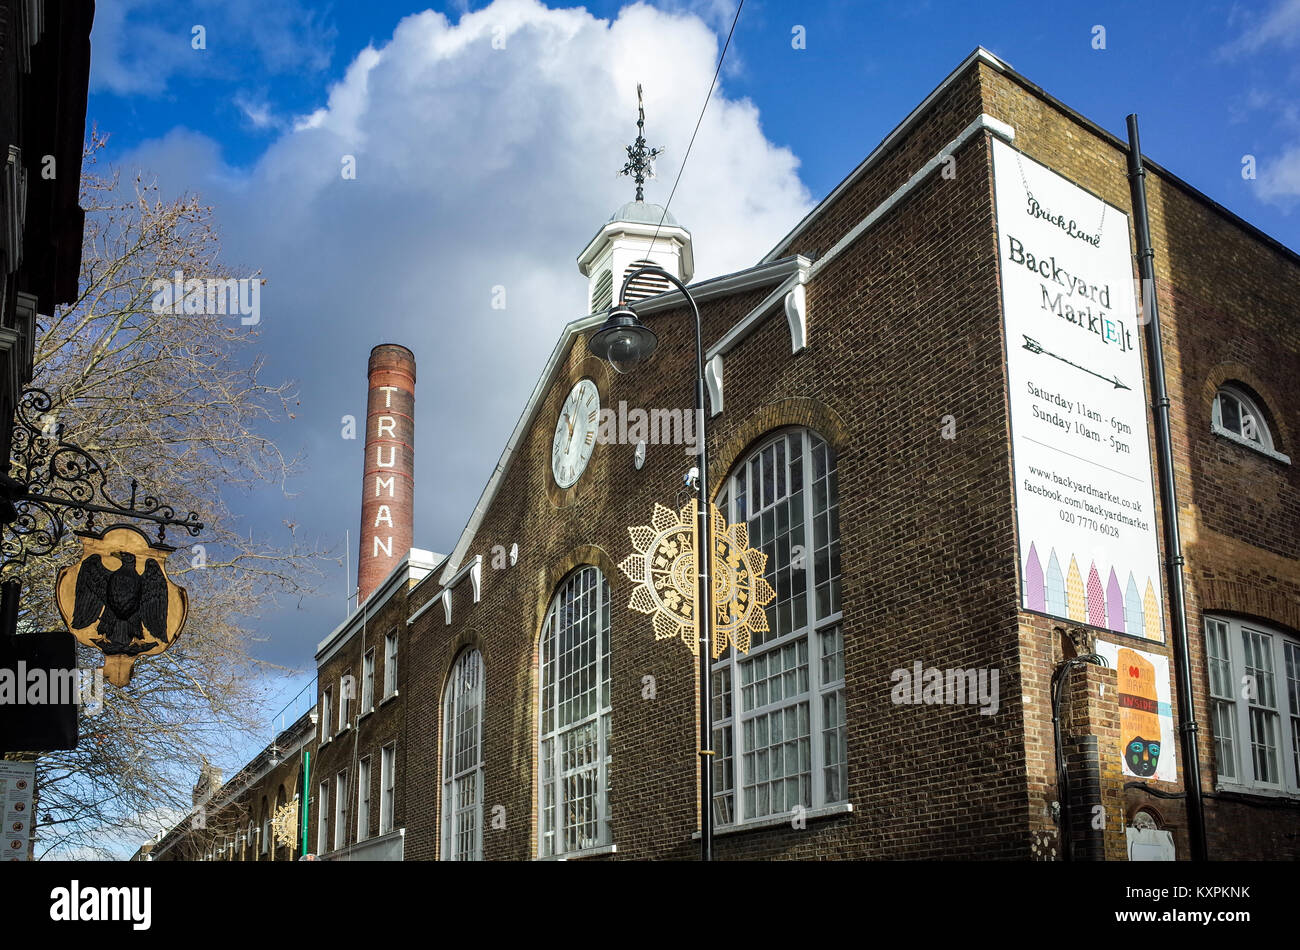 Brick Lane London - The Old Truman Brewery in London's Popular Brick Lane, Shoreditch, East London. Banque D'Images